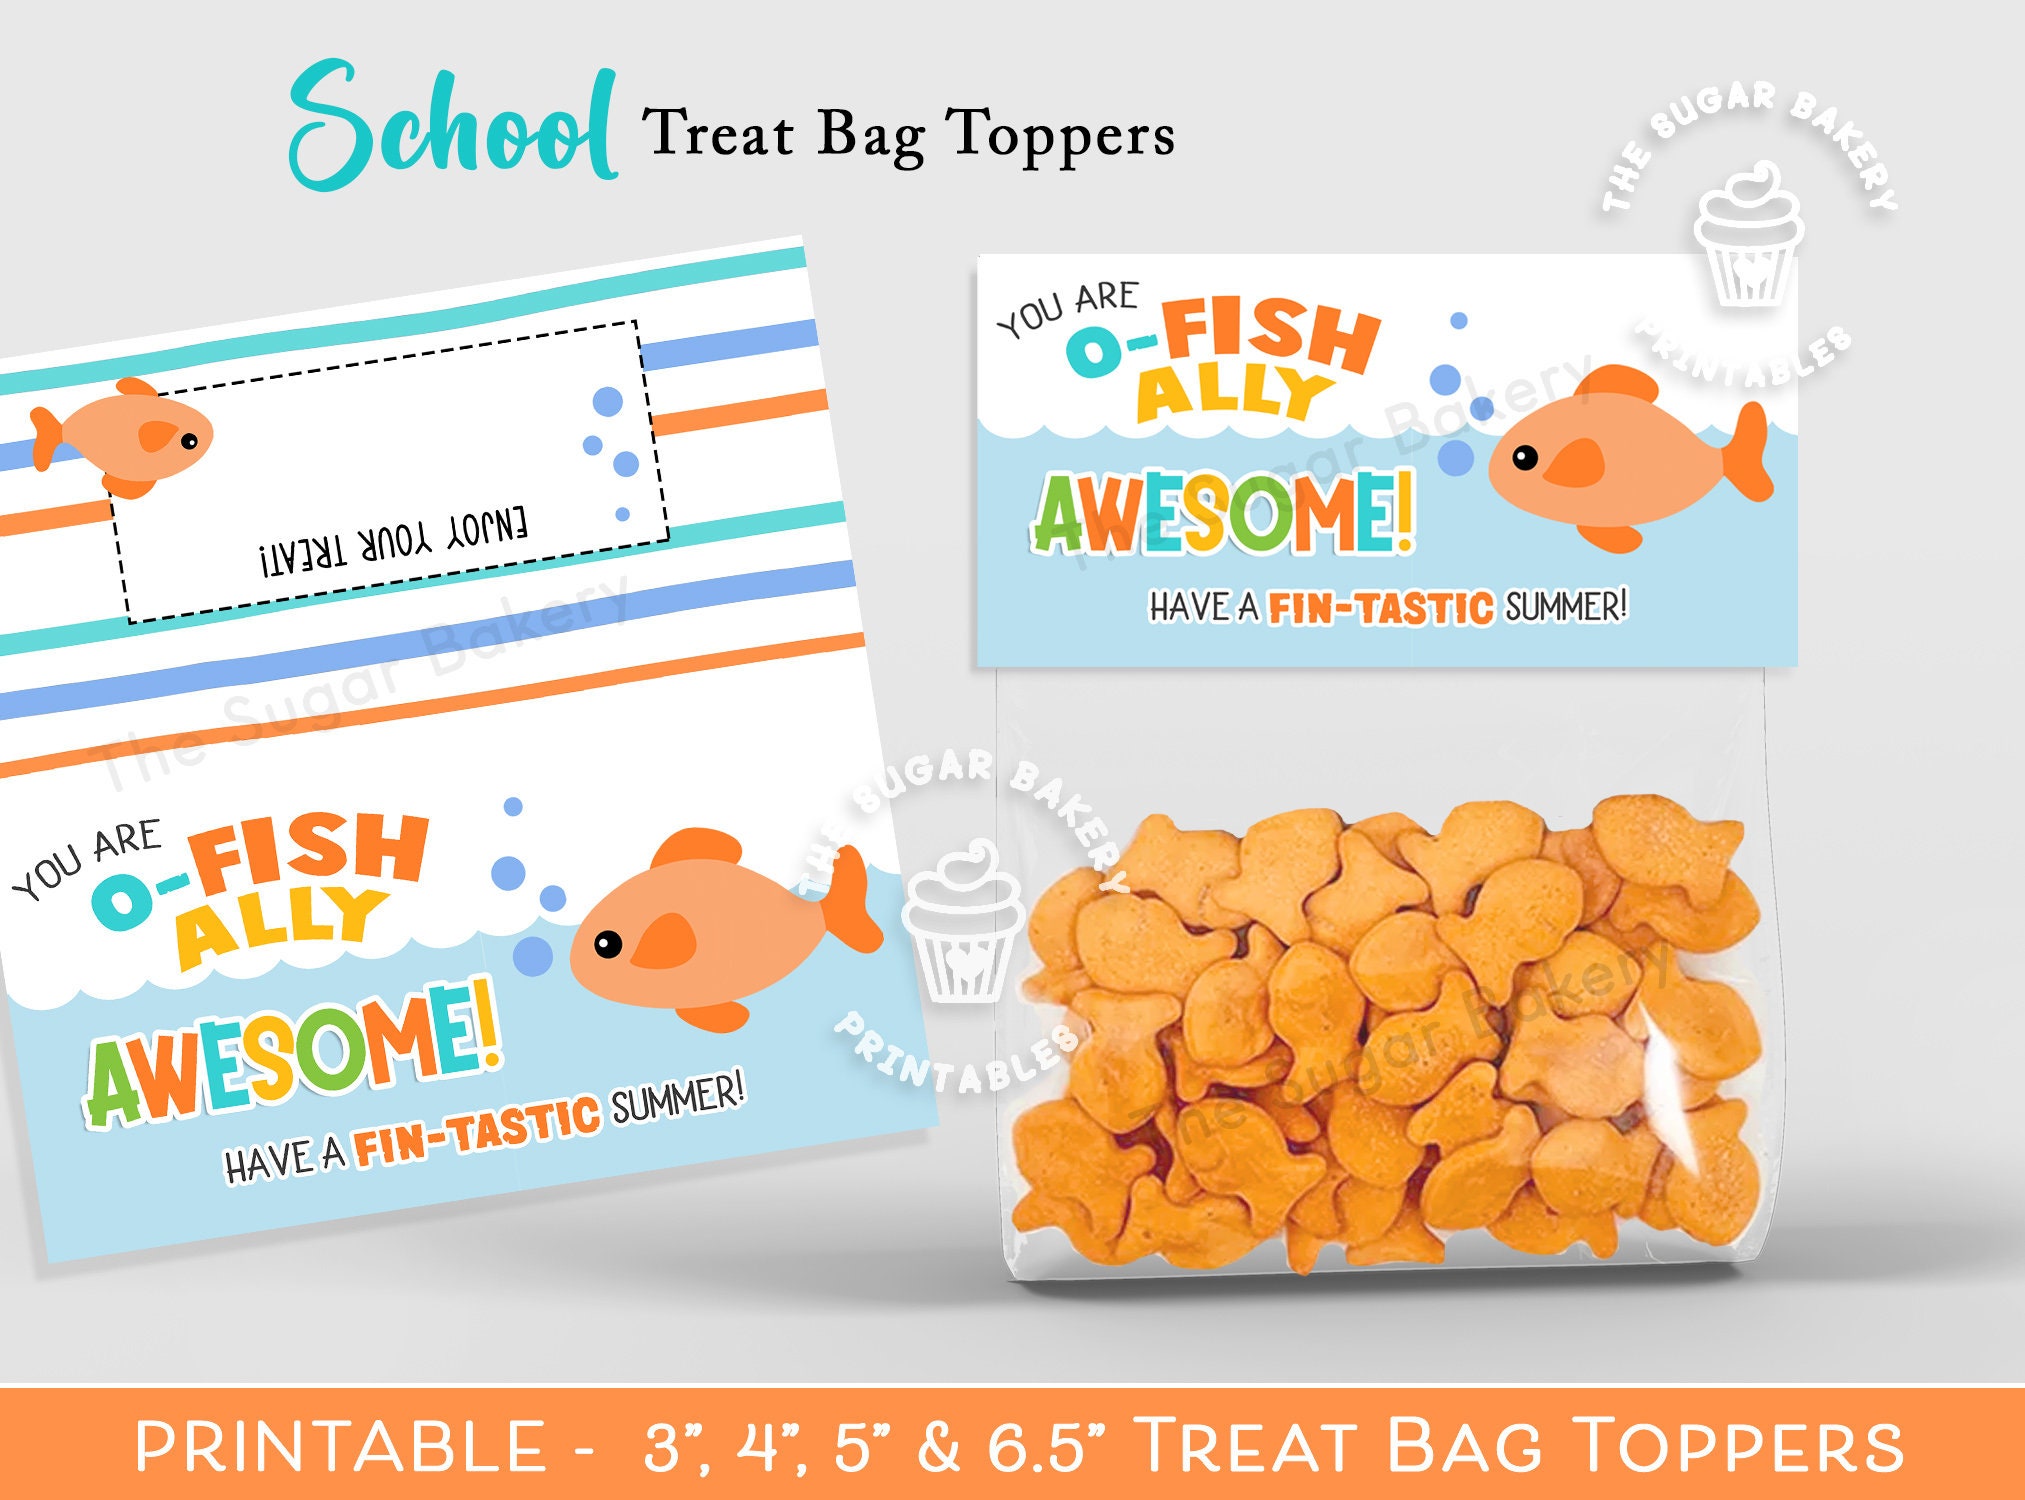 Go Fish Snack Bags - Our Kid Things